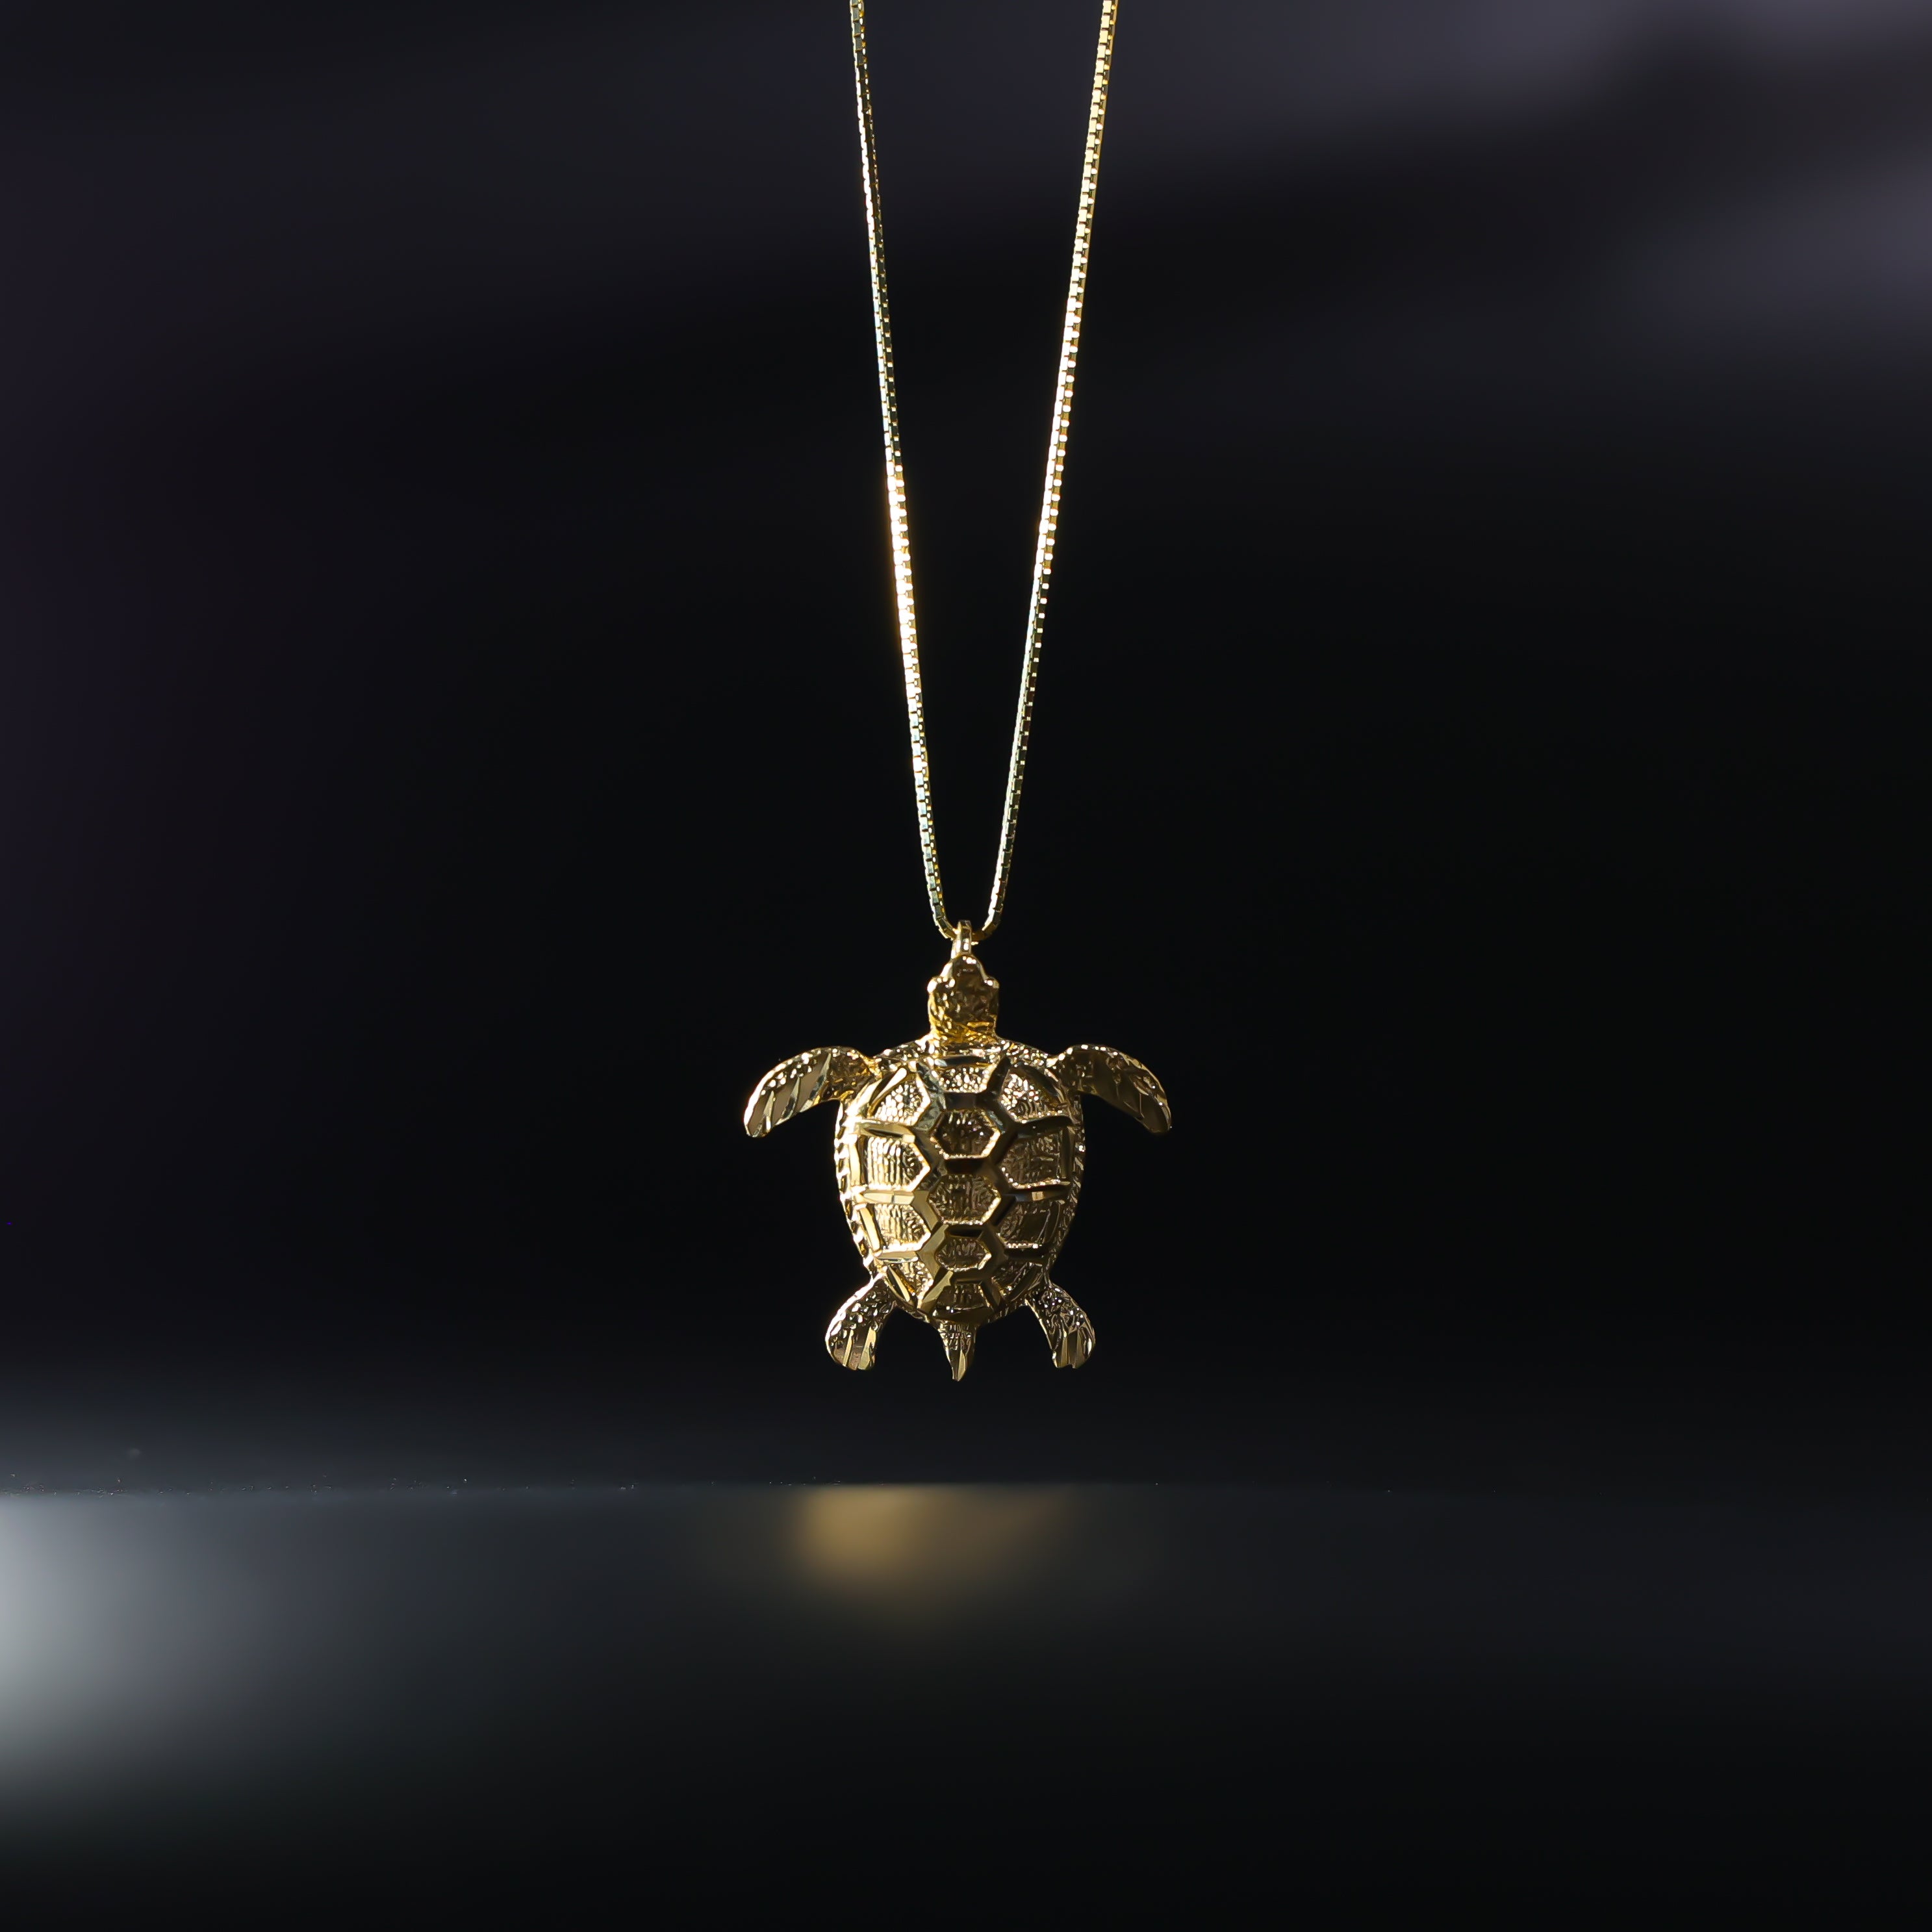 Gold Turtle Pendant Model-1683 - Charlie & Co. Jewelry